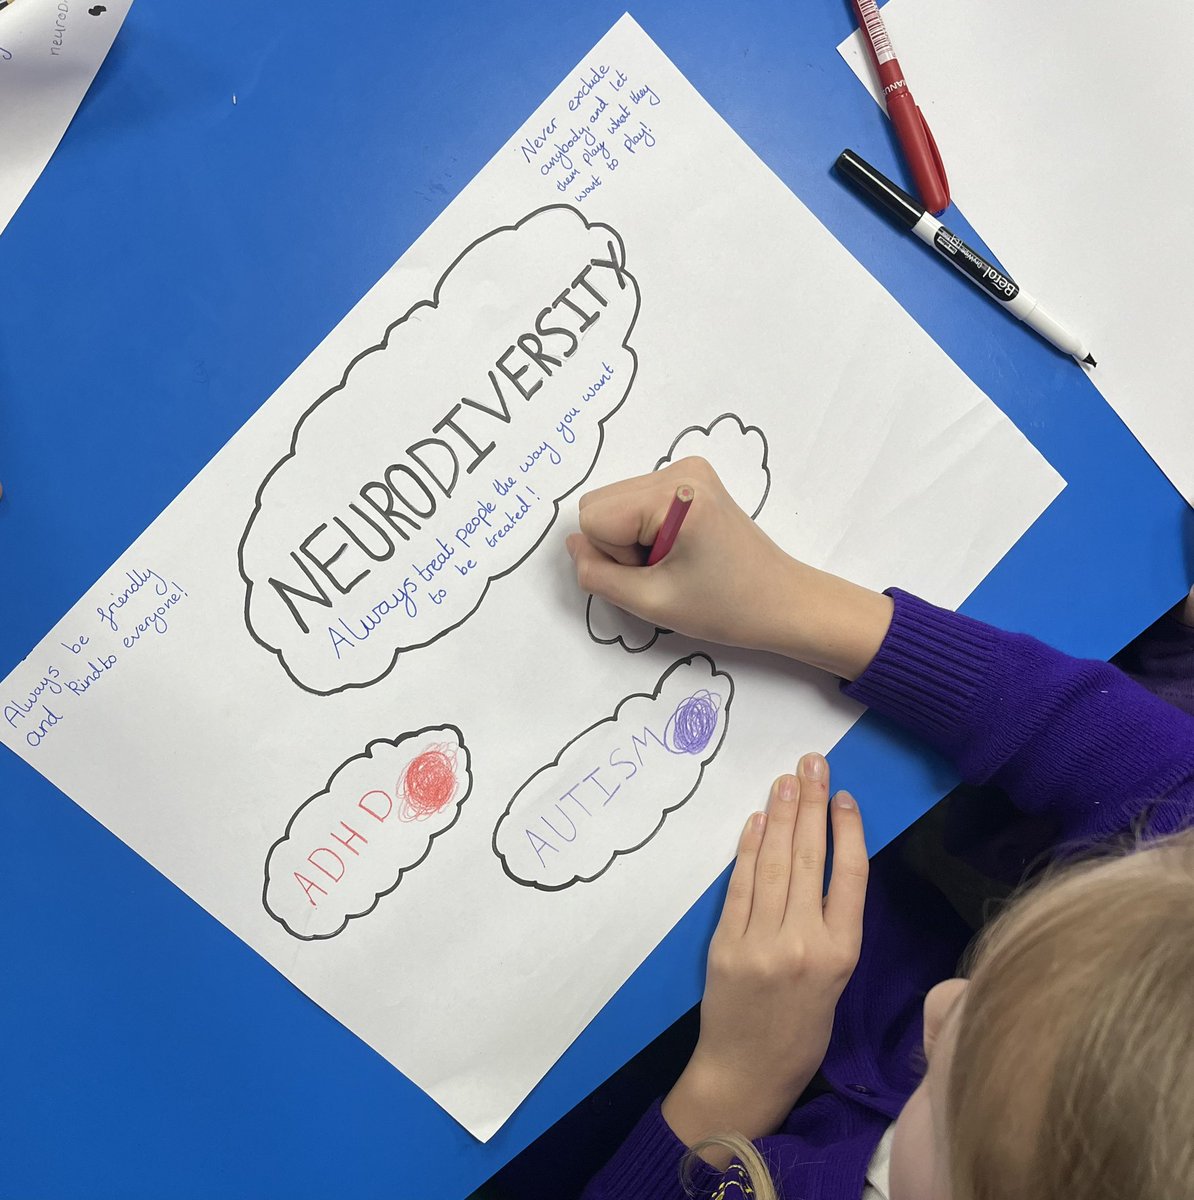 Today we explored, different neurodivergent people, we created posters advertising neurodiversity and explaining how powerful being neurodivergent can be! This was to celebrate #NeurodiversityWeek ❤️ 🌈